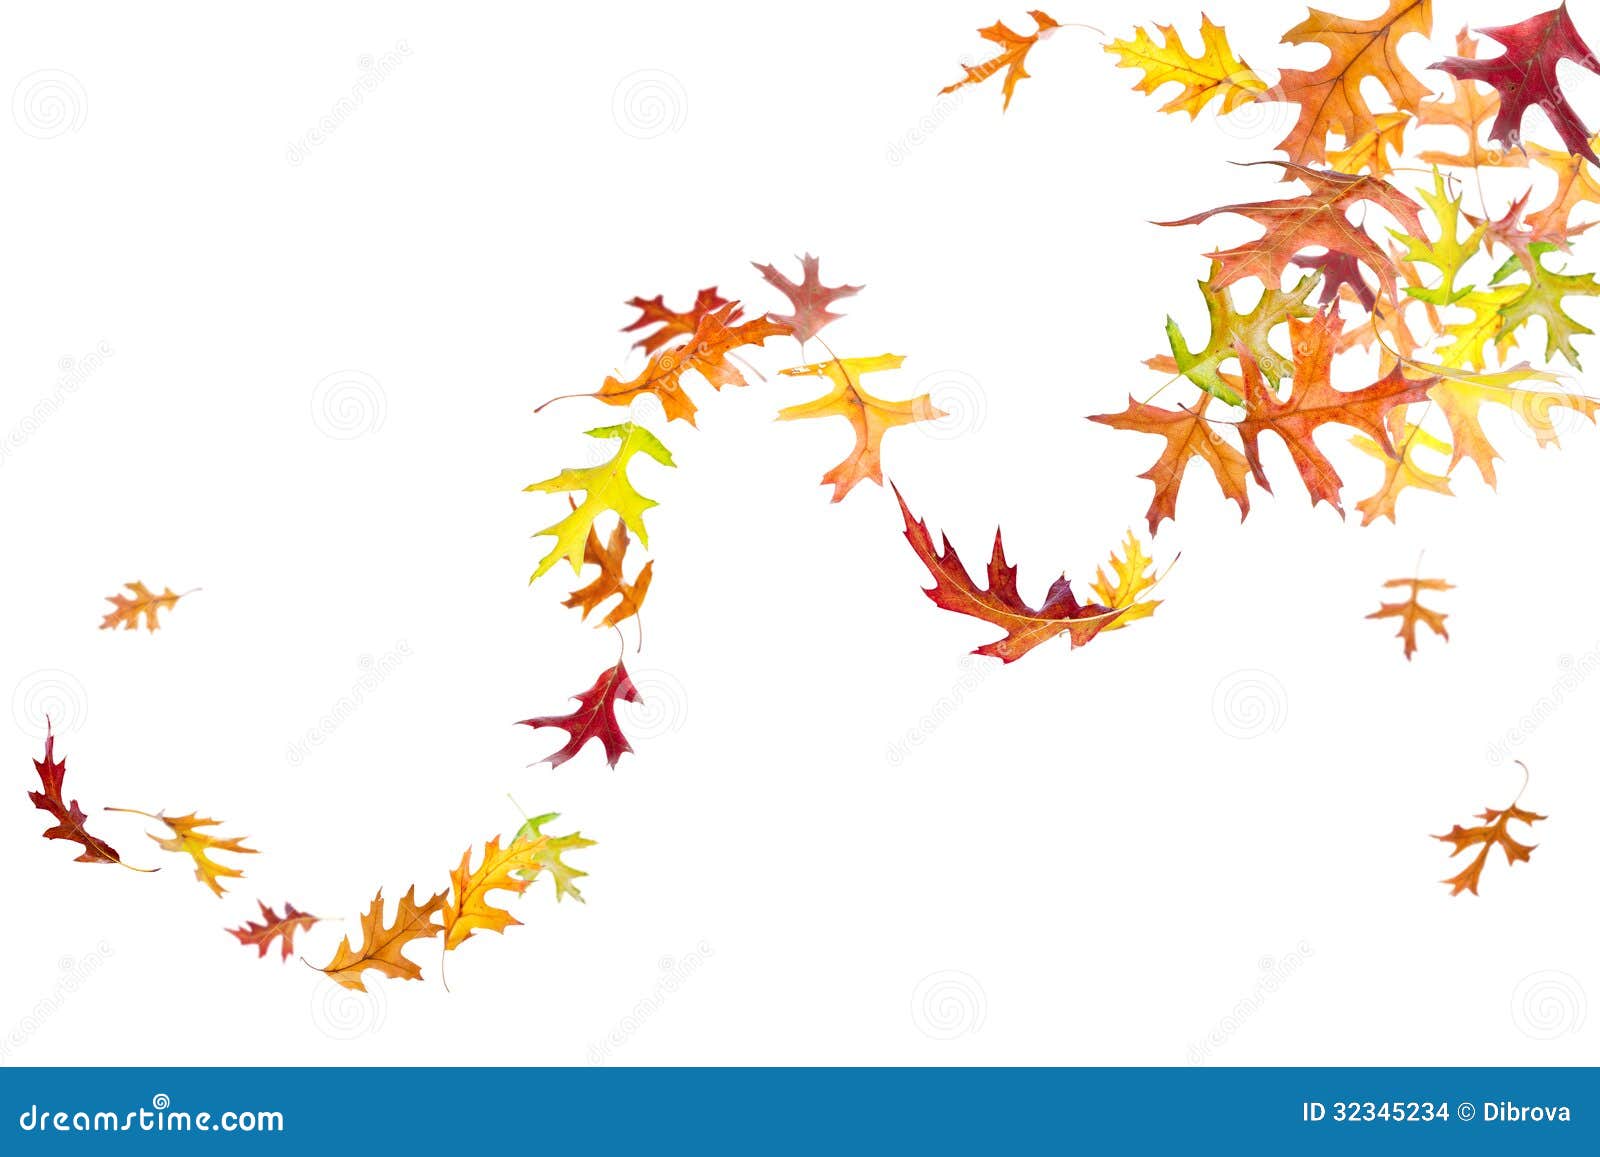 clip art leaves blowing - photo #30